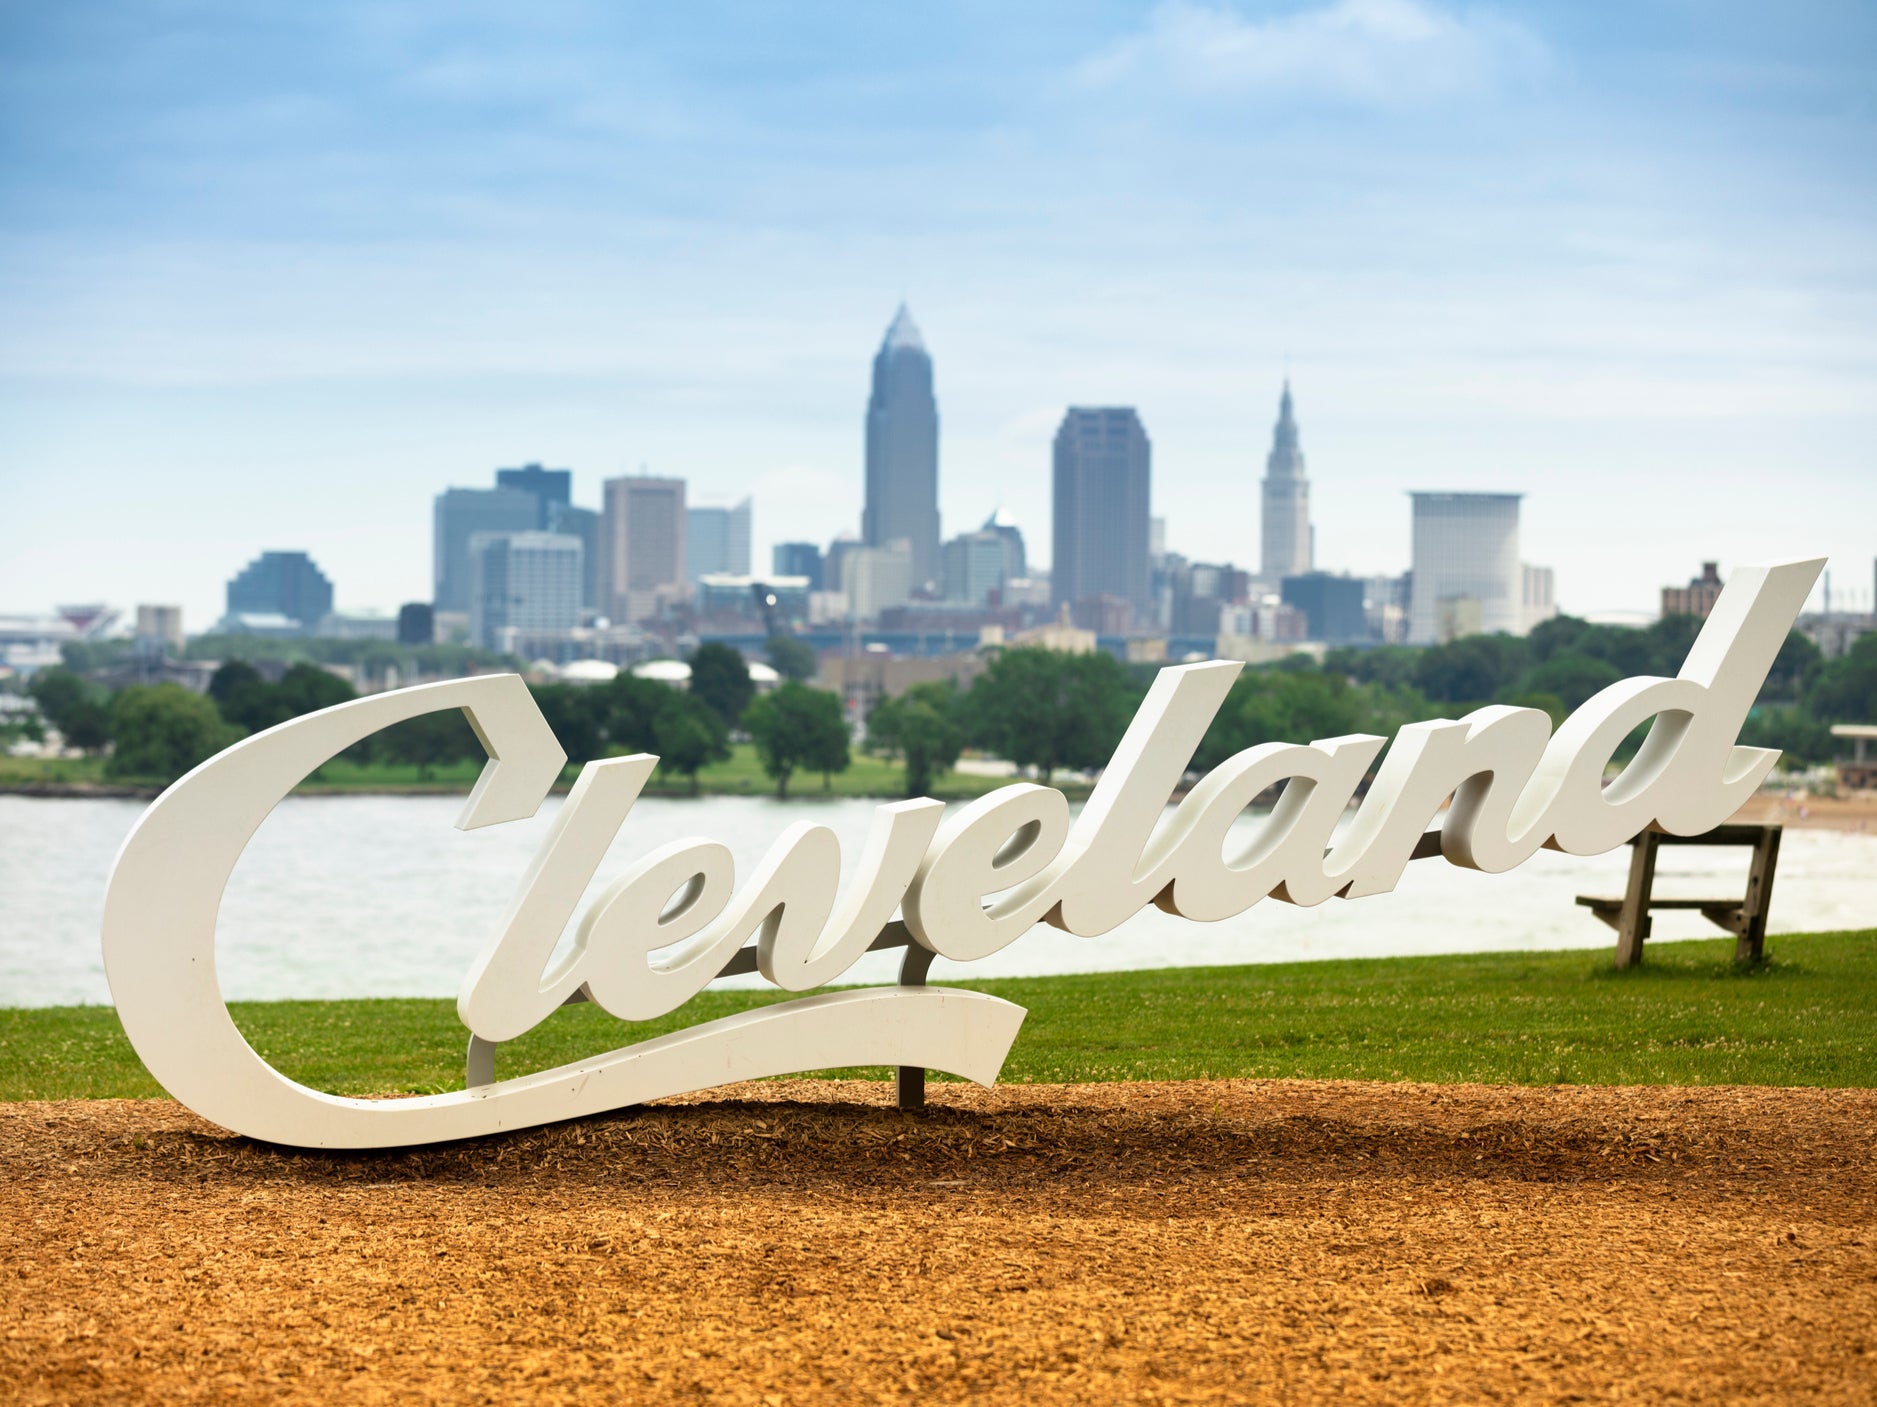 Cleveland, Ohio, USA - June 19, 2018: The famous Cleveland sign landmark script overlooking the downtown skyline and Lake Erie Ohio USA